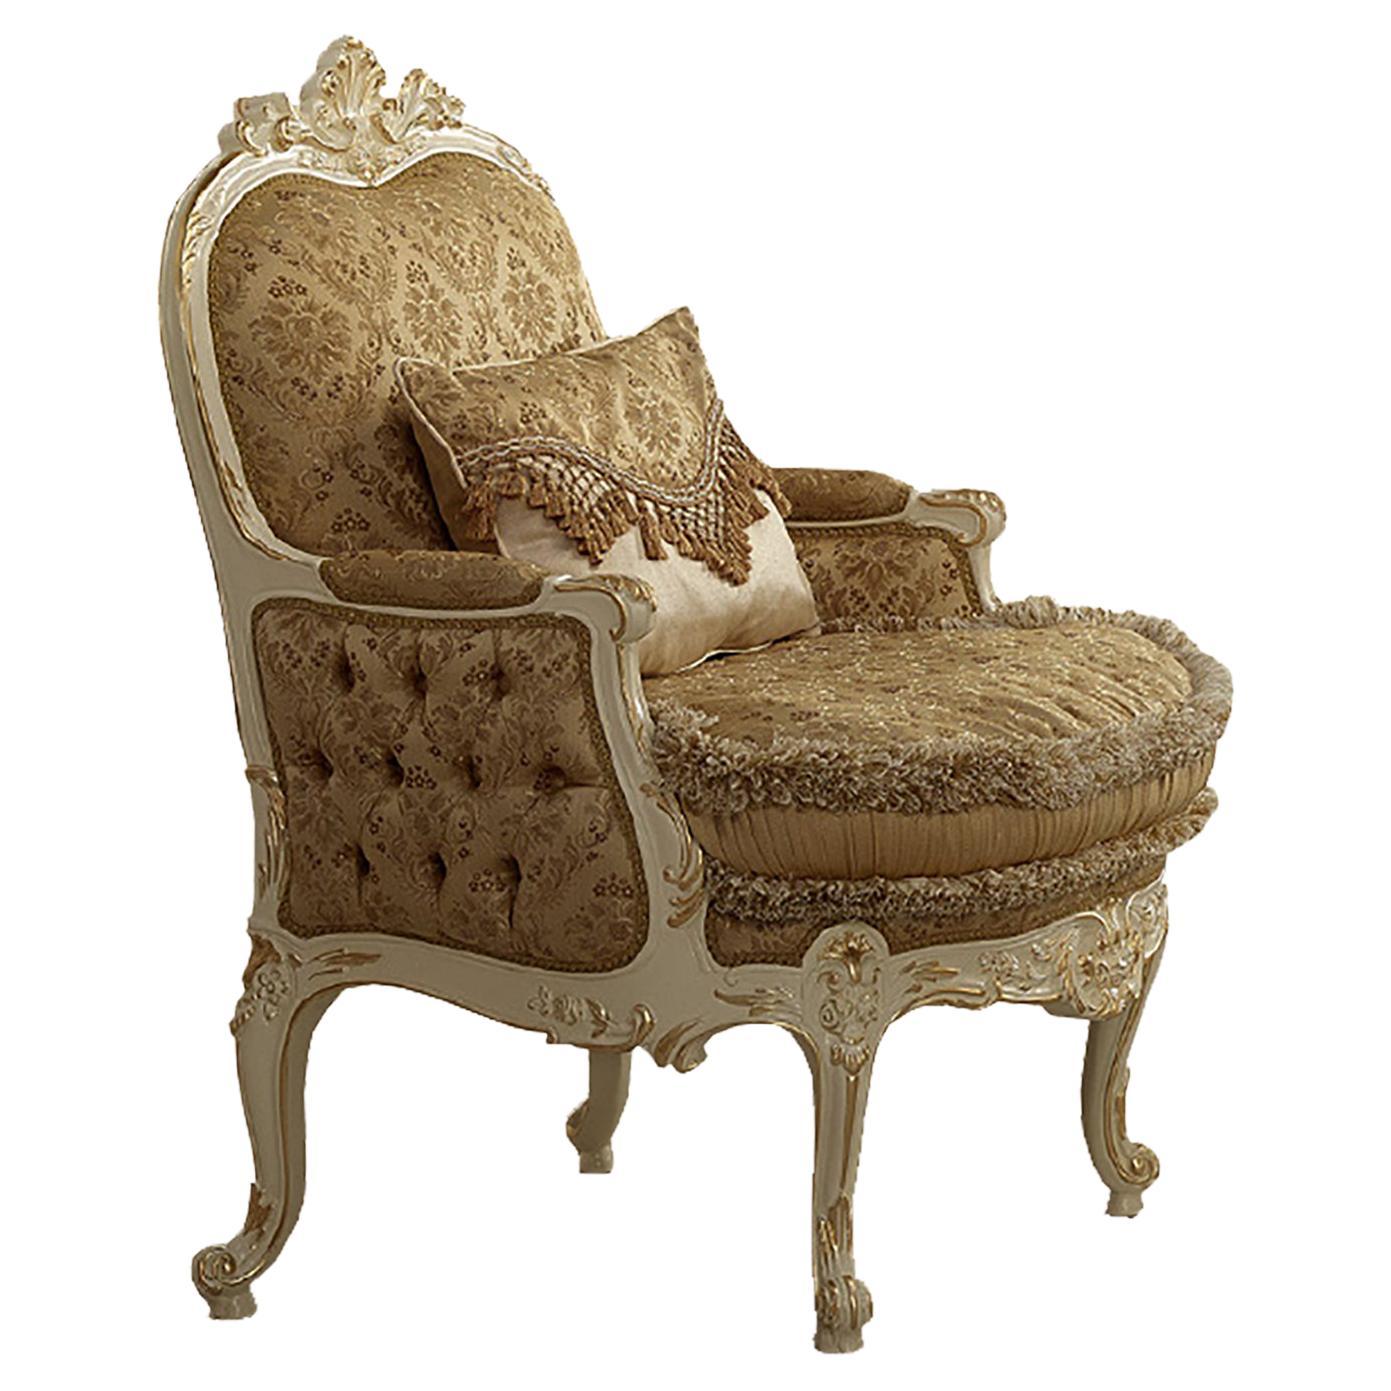 Victorian Armchair in Cream Beige Fabric with Ivory Finishing by Modenese For Sale